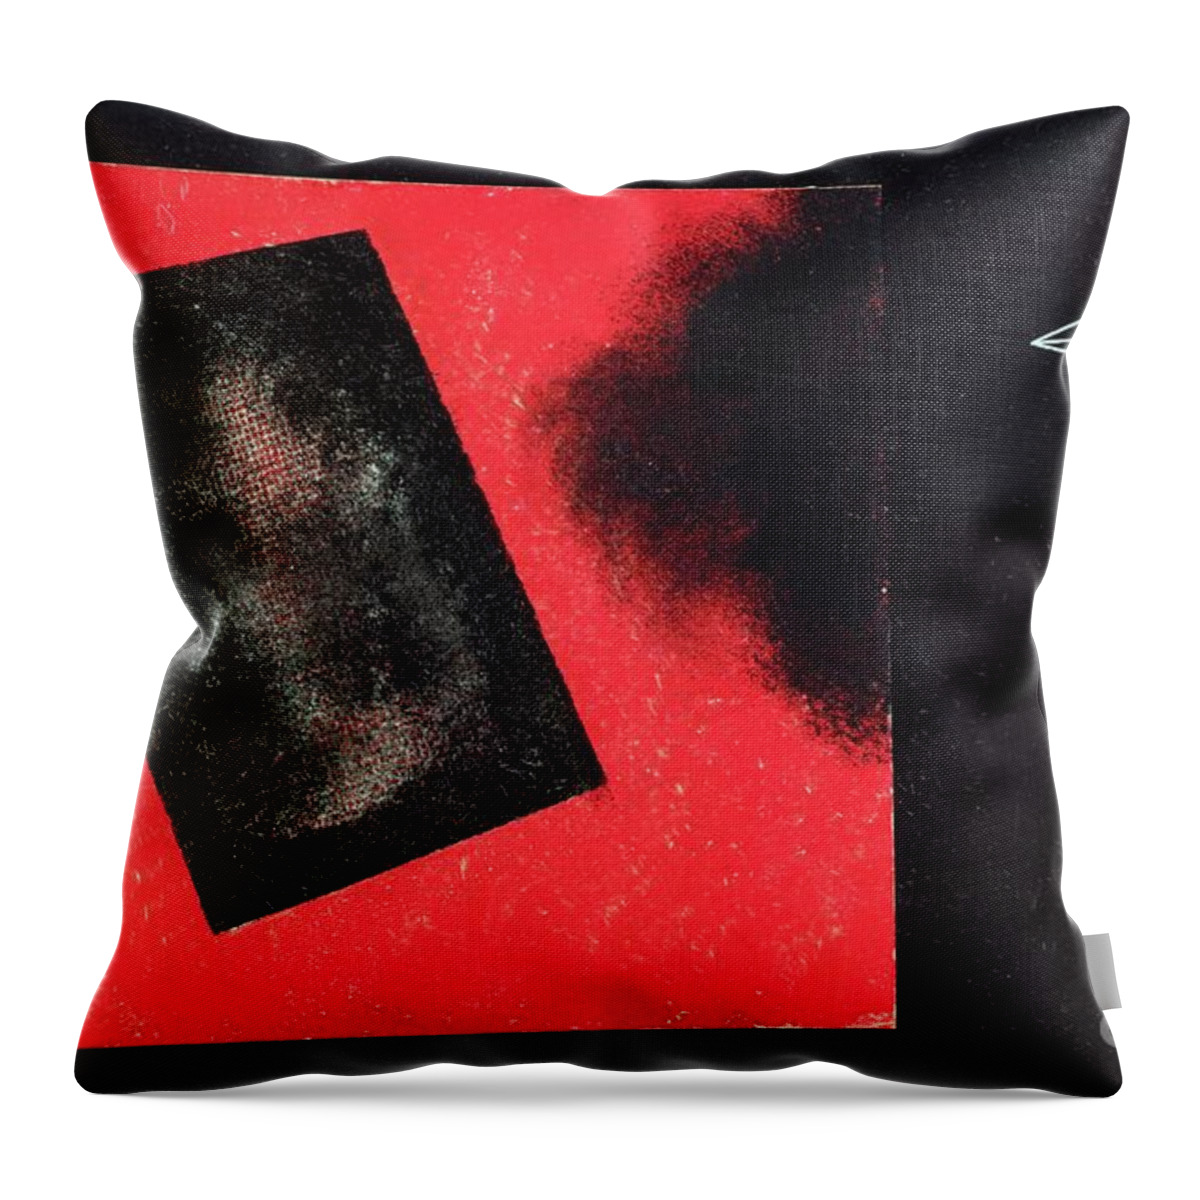 Blaue Reiter Throw Pillow featuring the painting A New Game Begins, 1930 by Paul Klee